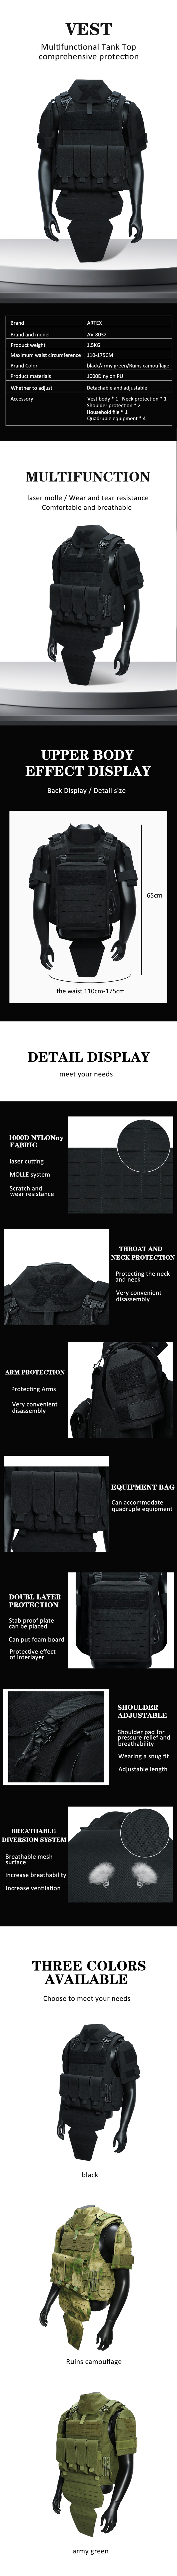 Fully protected tactical vest